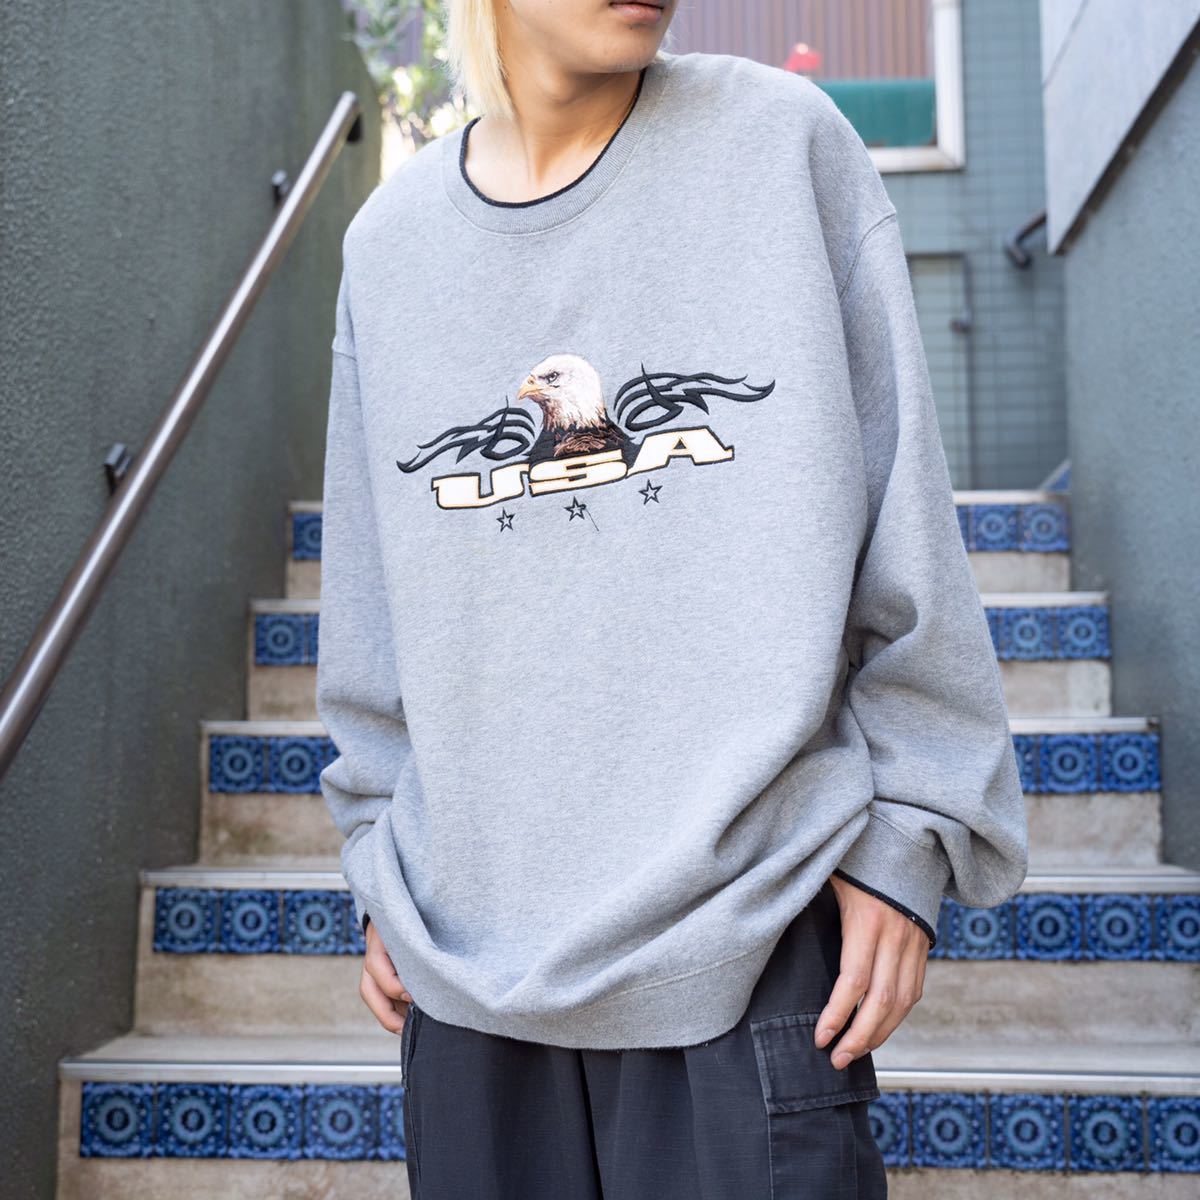 USA VINTAGE croft&barrow EAGLE EMBROIDERY DESIGN OVER SWEAT SHIRT/アメリカ古着鷲刺繍デザインオーバースウェット